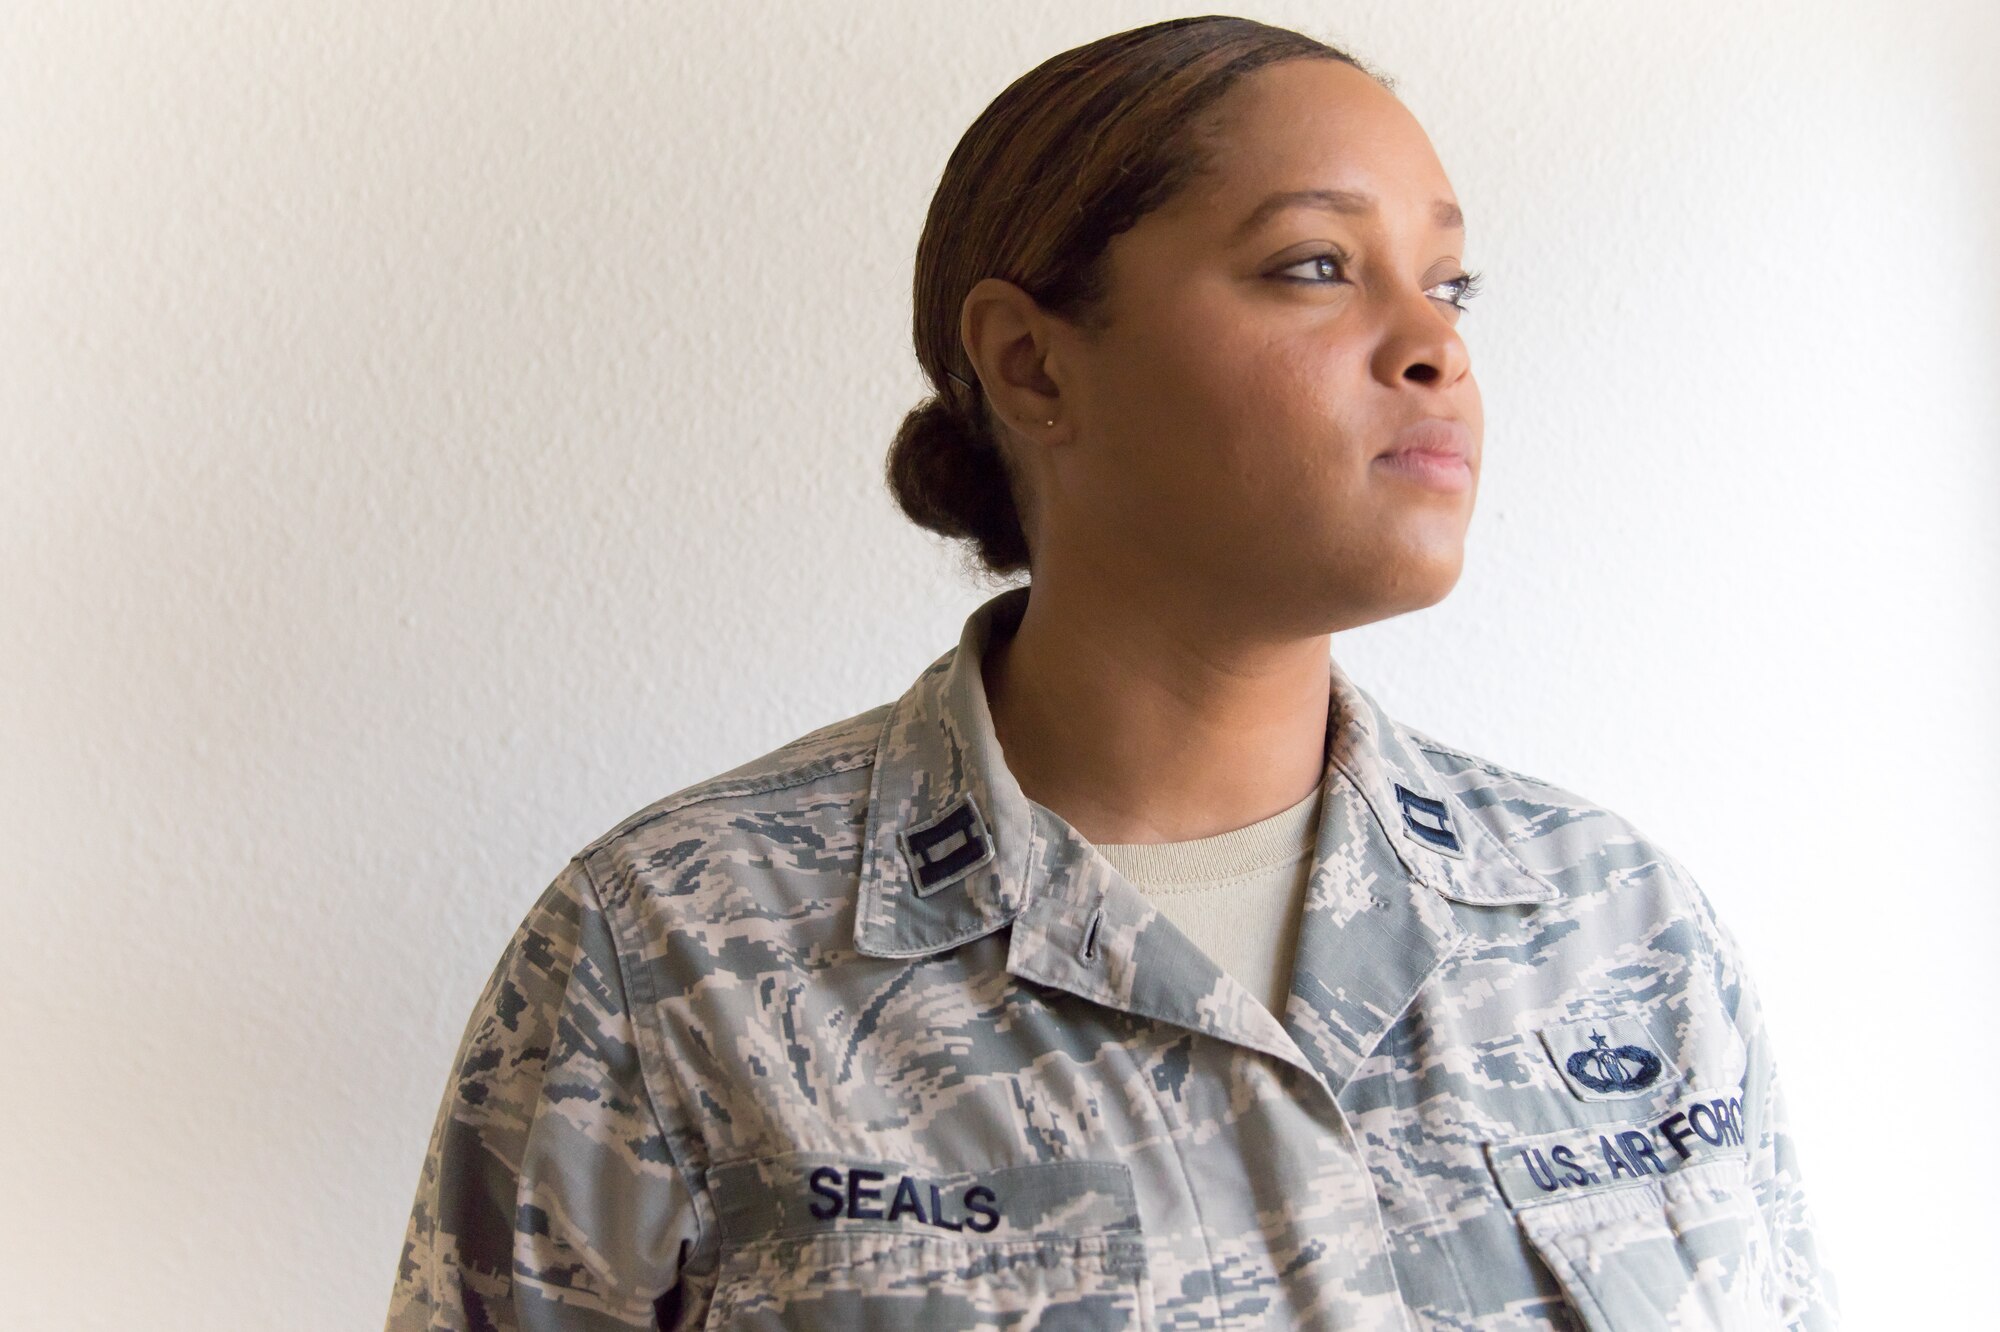 Capt. Yolanda Seals is the 403rd Wing executive officer and an Air Reserve Technician at Keesler Air Force Base, Mississippi. (U.S. Air Force photo by Staff Sgt. Heather Heiney)